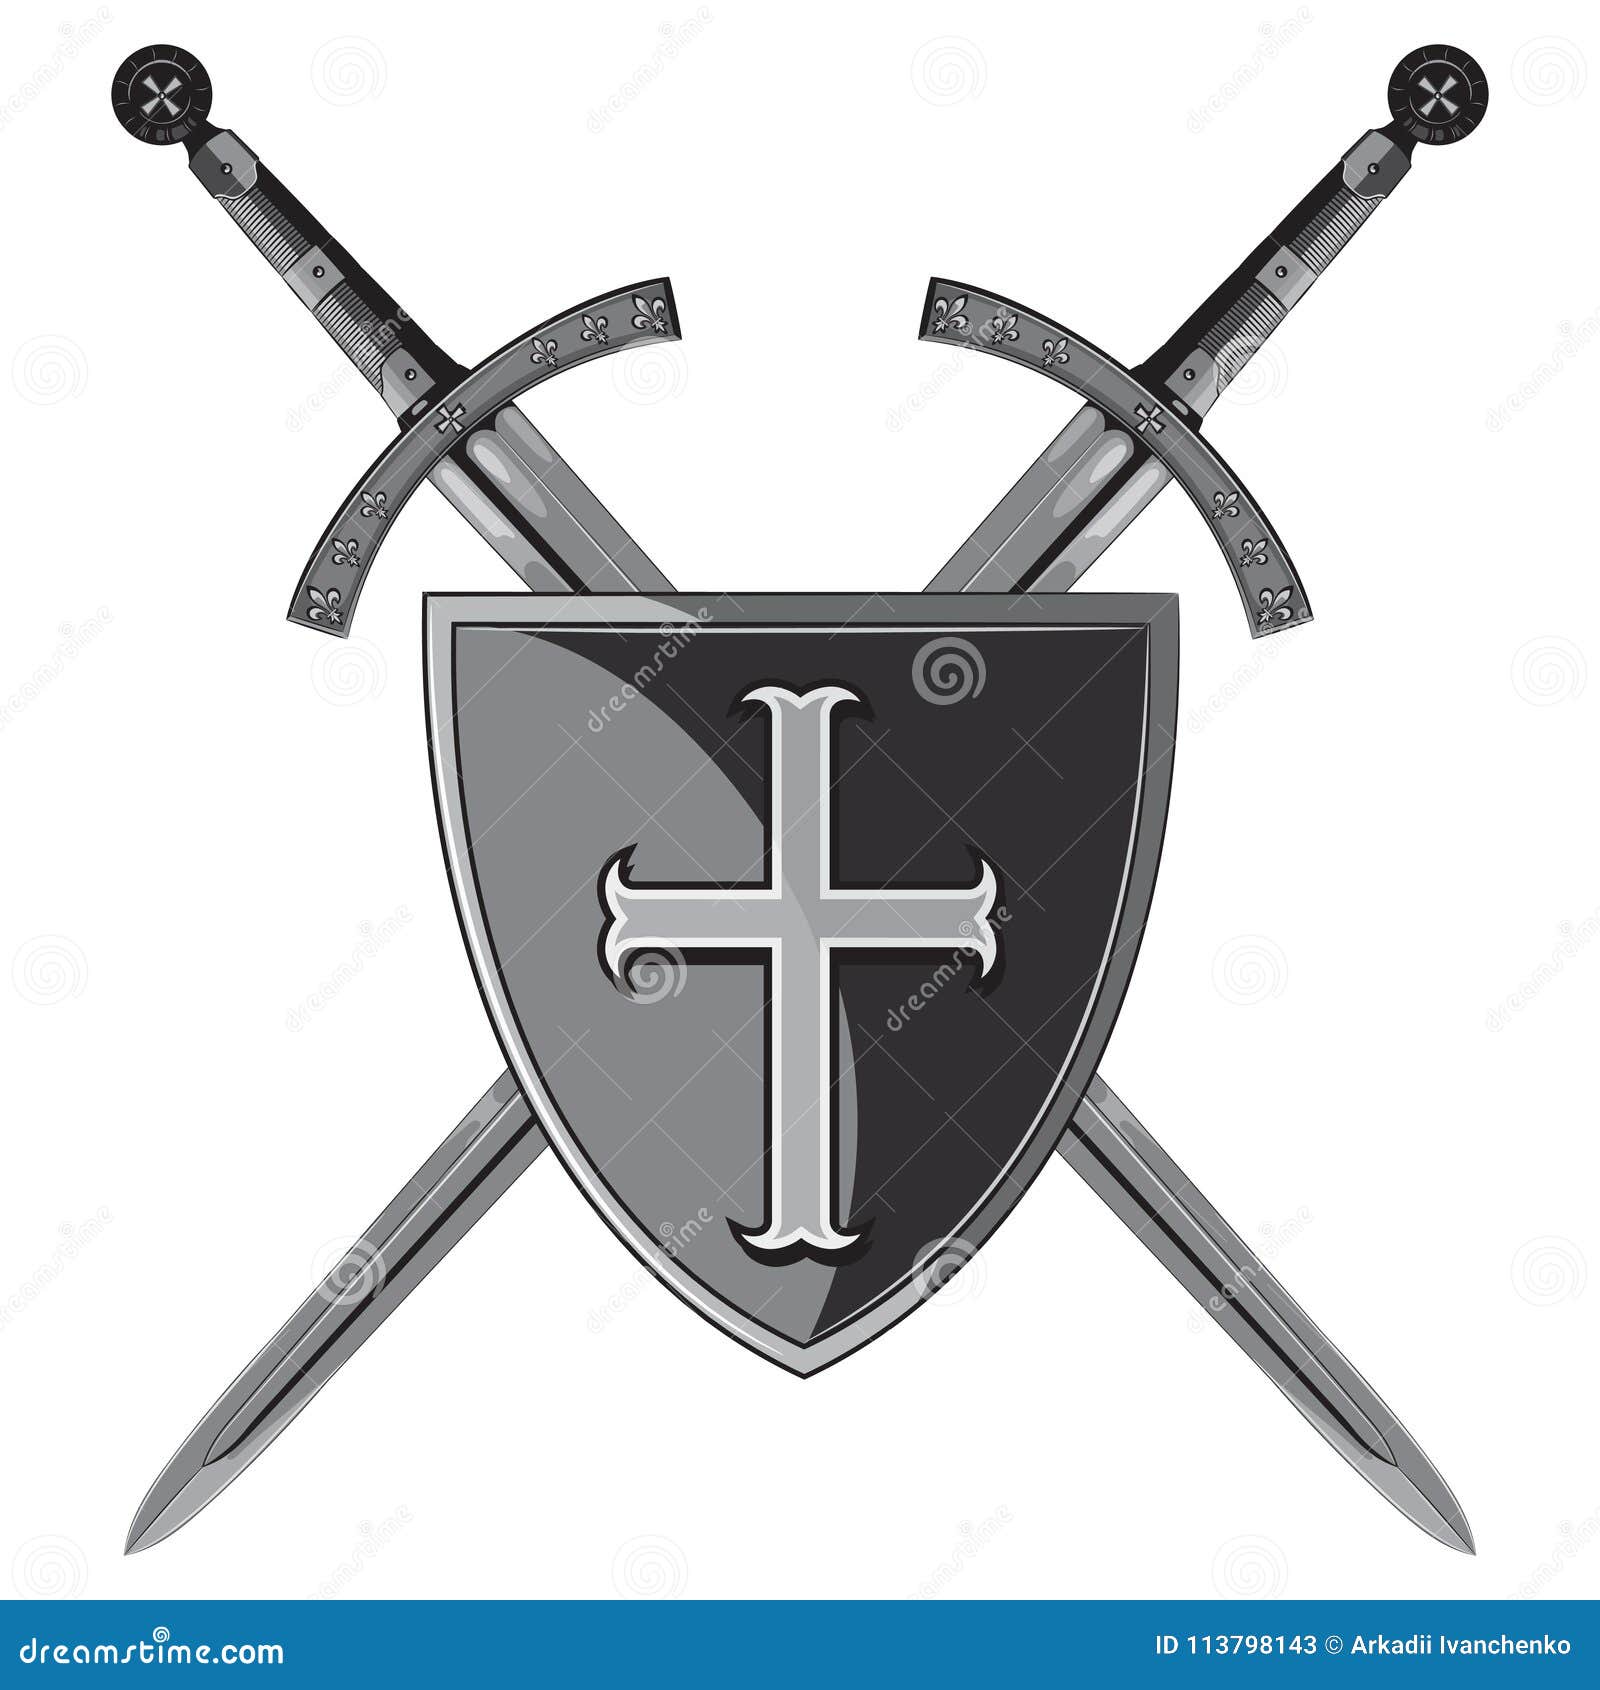 knight swords. two crossed knight of the sword and shield of the crusader